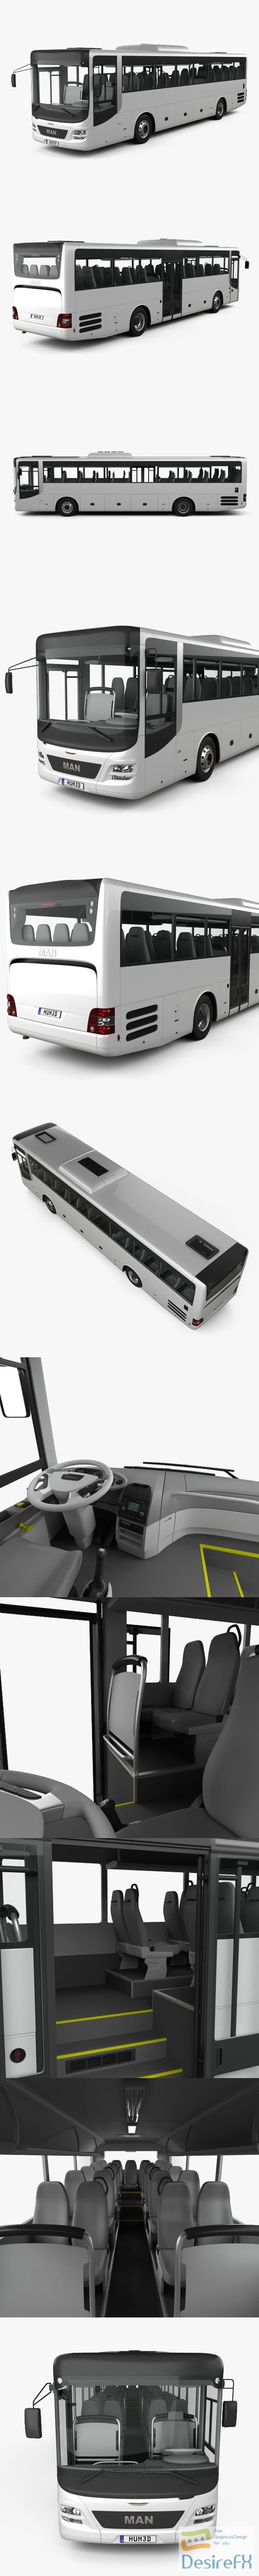 MAN Lion’s Intercity Bus with HQ interior 2015 3D Model